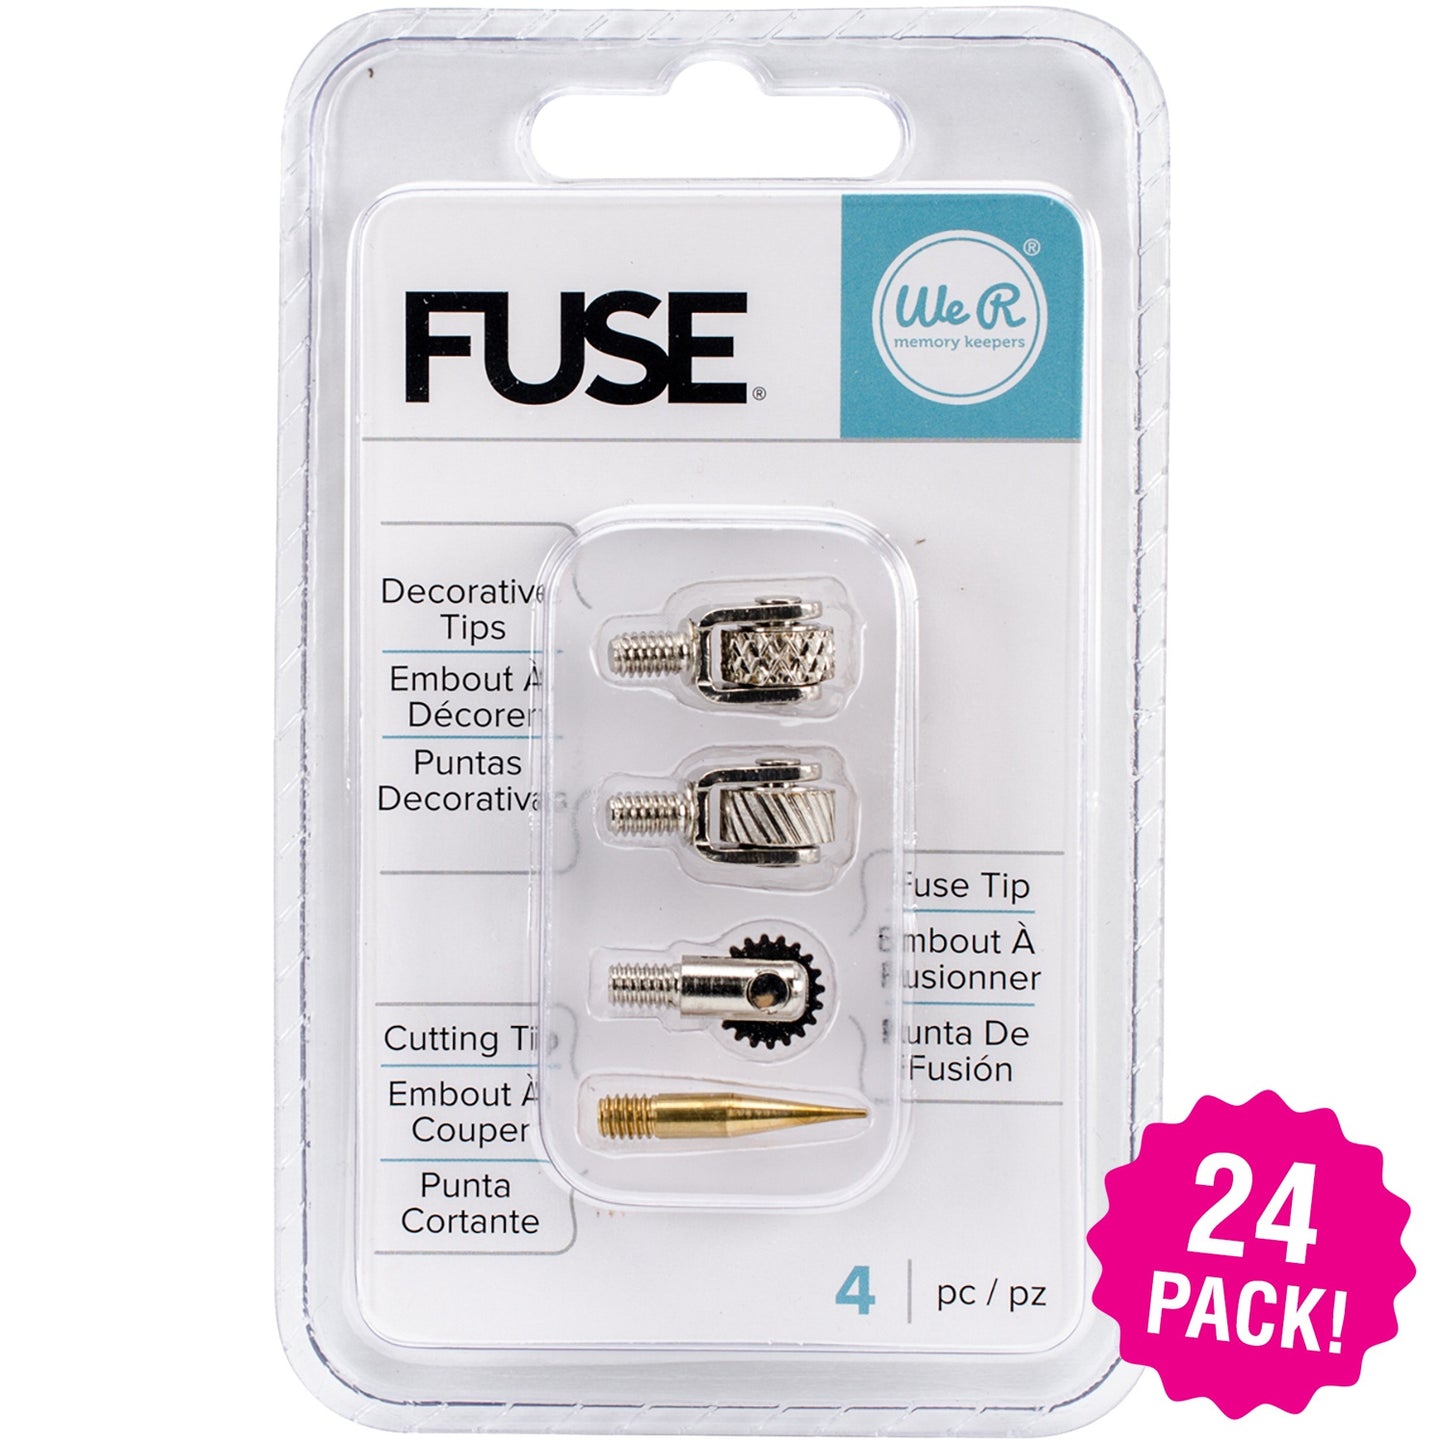 Multipack of 24 - We R Fuse Tool Tips 4/Pkg-Decorative, Cutting & Fusing